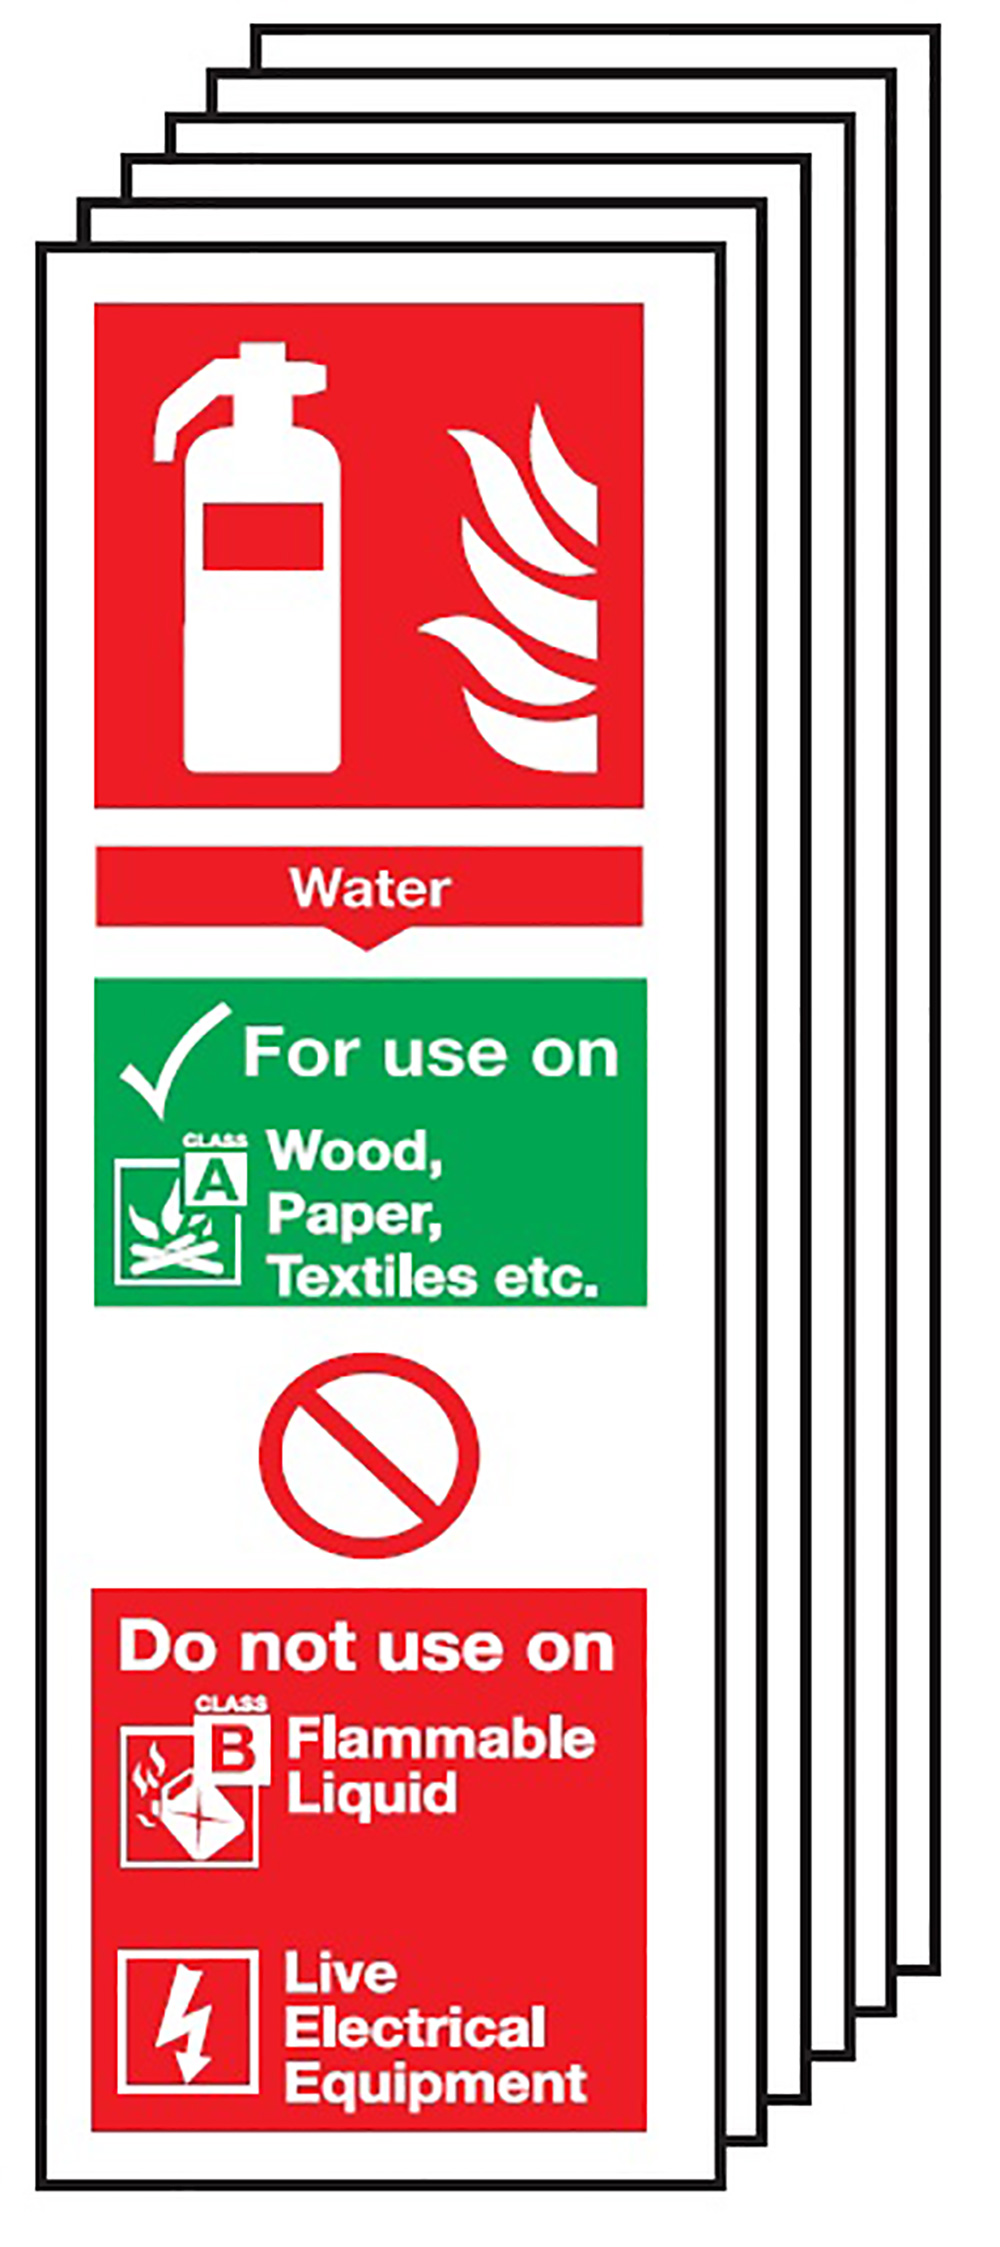 Water Extinguisher For Use On 300x100mm Safety Sign Pack of 6